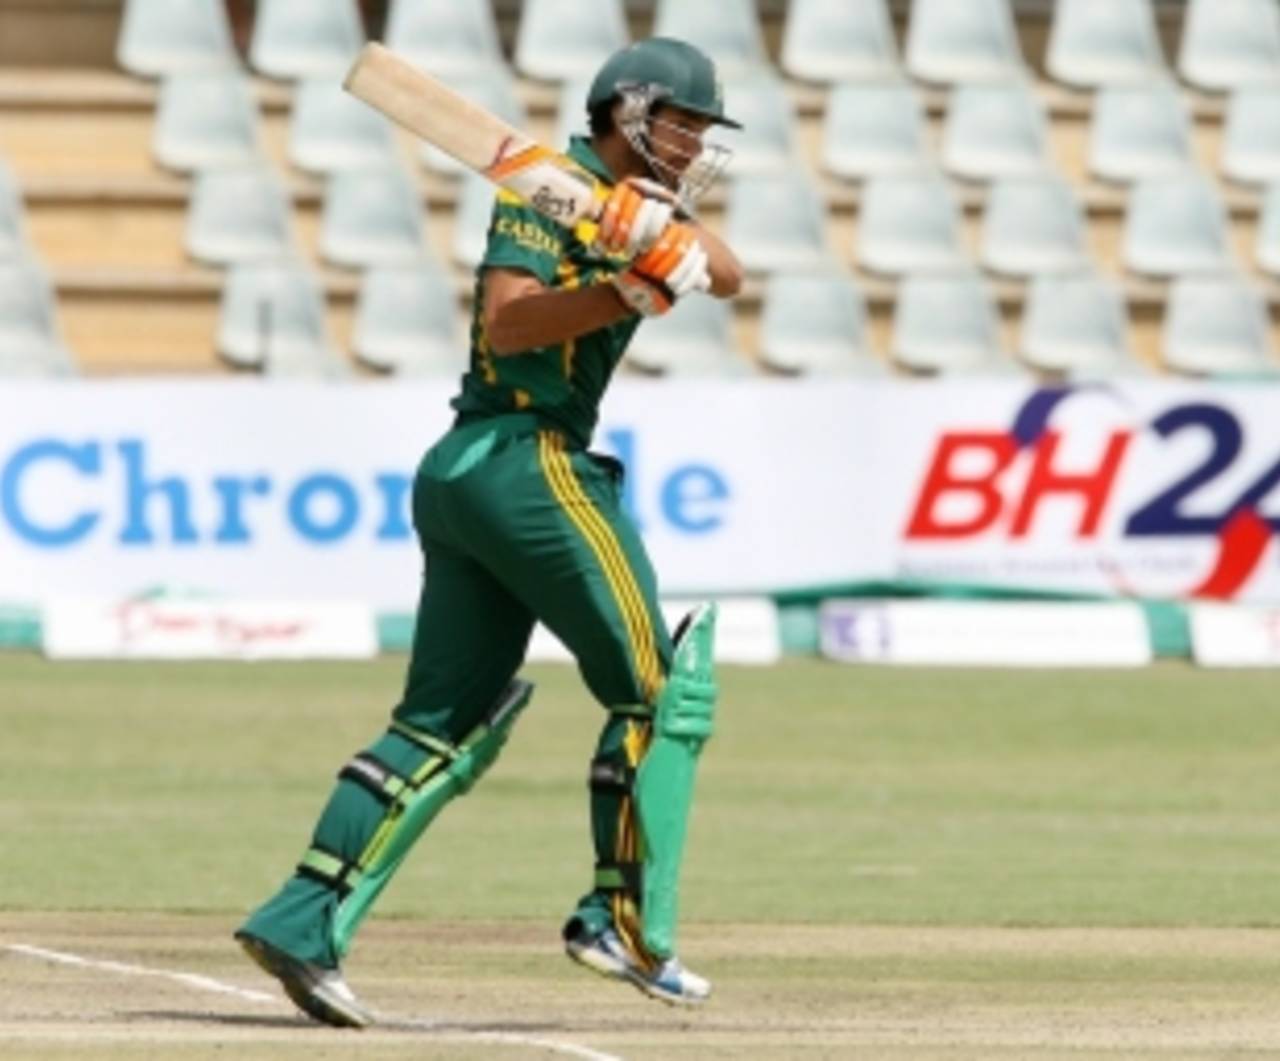 Rilee Roussow scored 36 more than his previous two innings combined, Zimbabwe v South Africa, tri-series, Harare, September 4, 2014